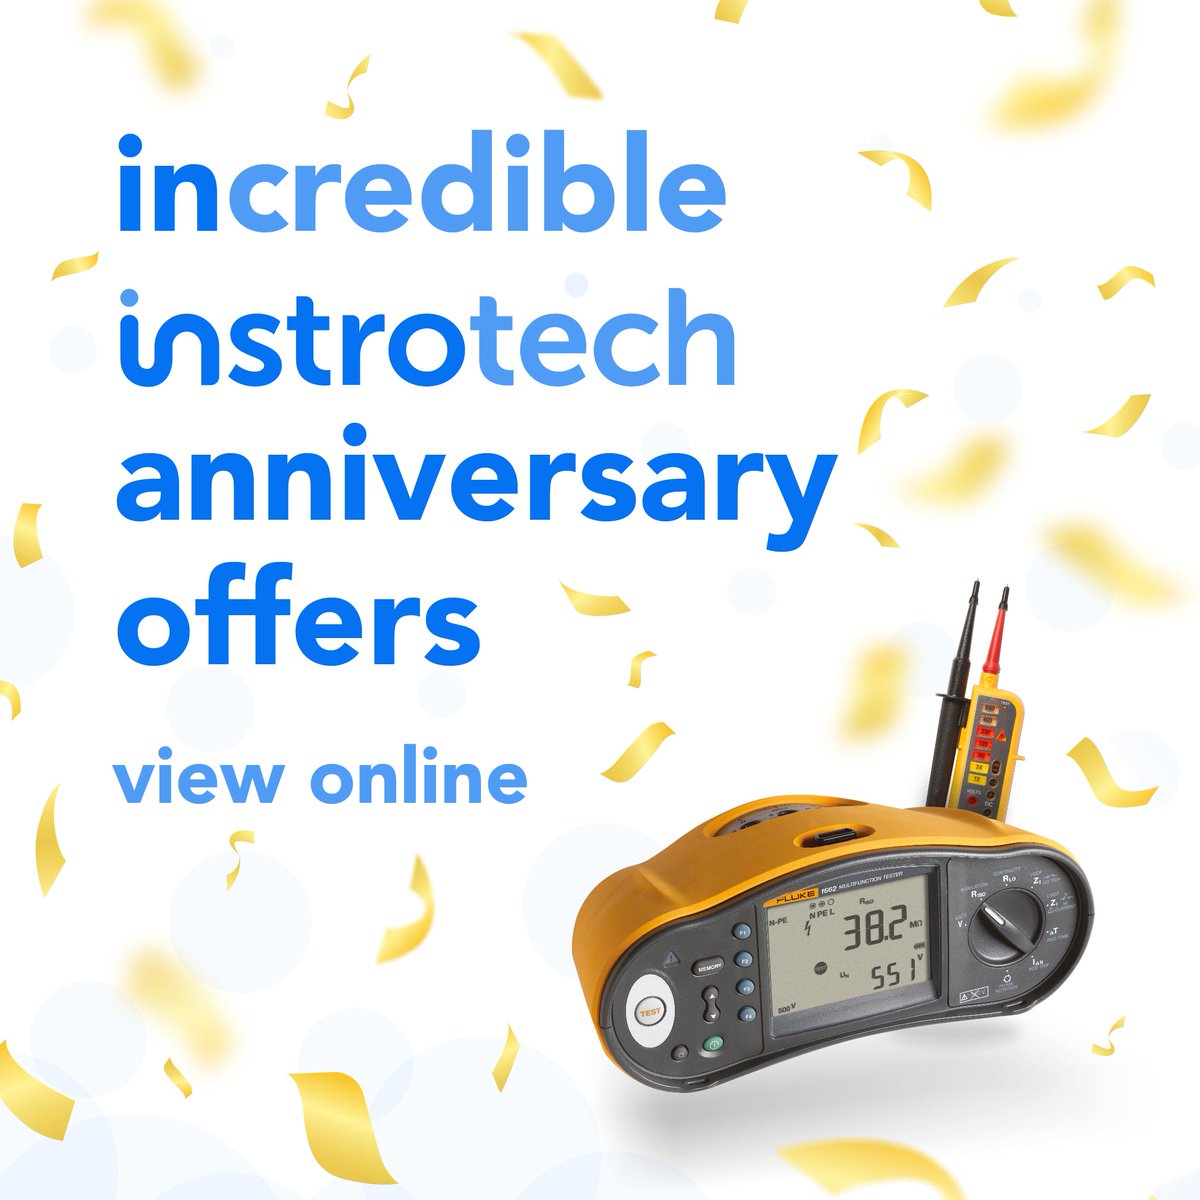 Celebrating 40 years of Instrotech. FREE T90 Two-Pole Tester when you buy a Fluke 1662 Multifunction Tester!

instrotech.com/fluke-1662-mul…

#instrotech #40yearsofinstrotech #40thanniversary #Electricians #equipment #testequipment #hireequipment #tools #trade#electrician #hire